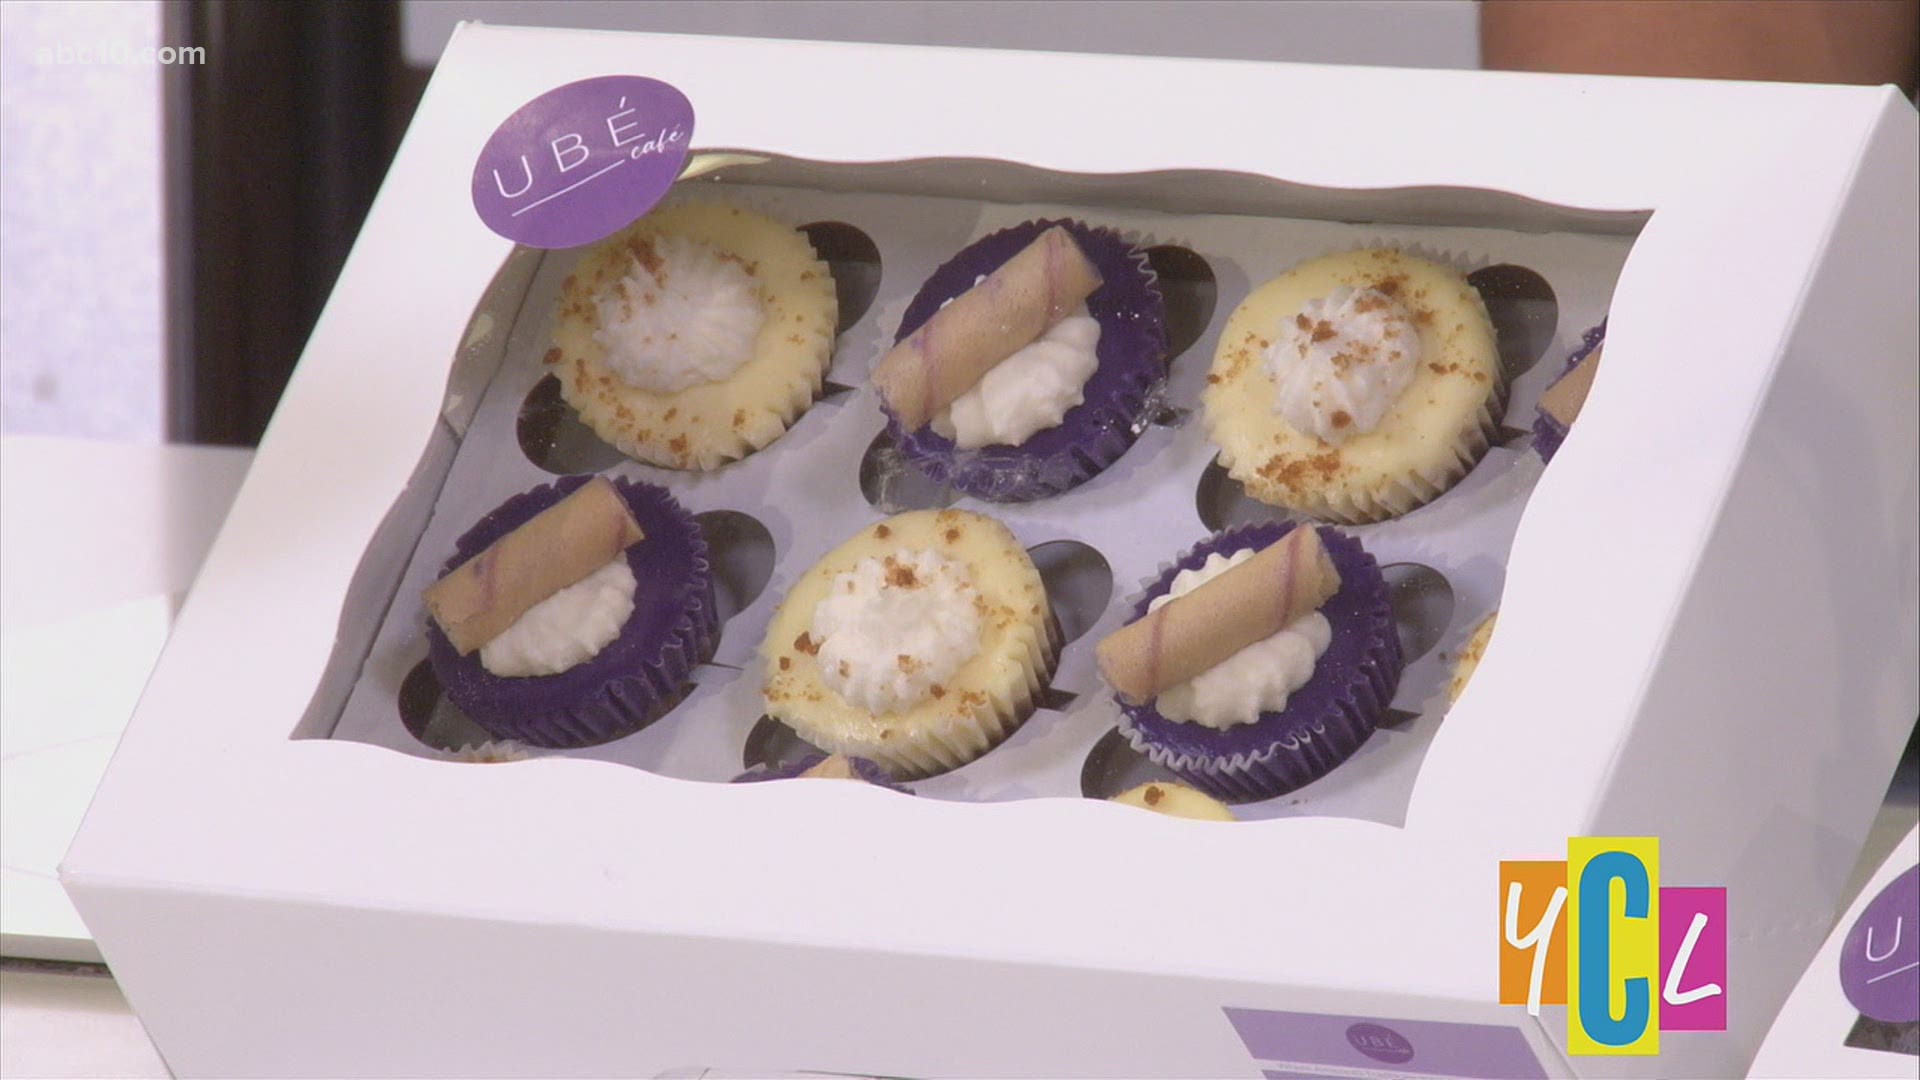 We get the tasty details on Sacramento's "Ube Café" offering artisan sweets that highlight Filipino roots with an American upbringing.